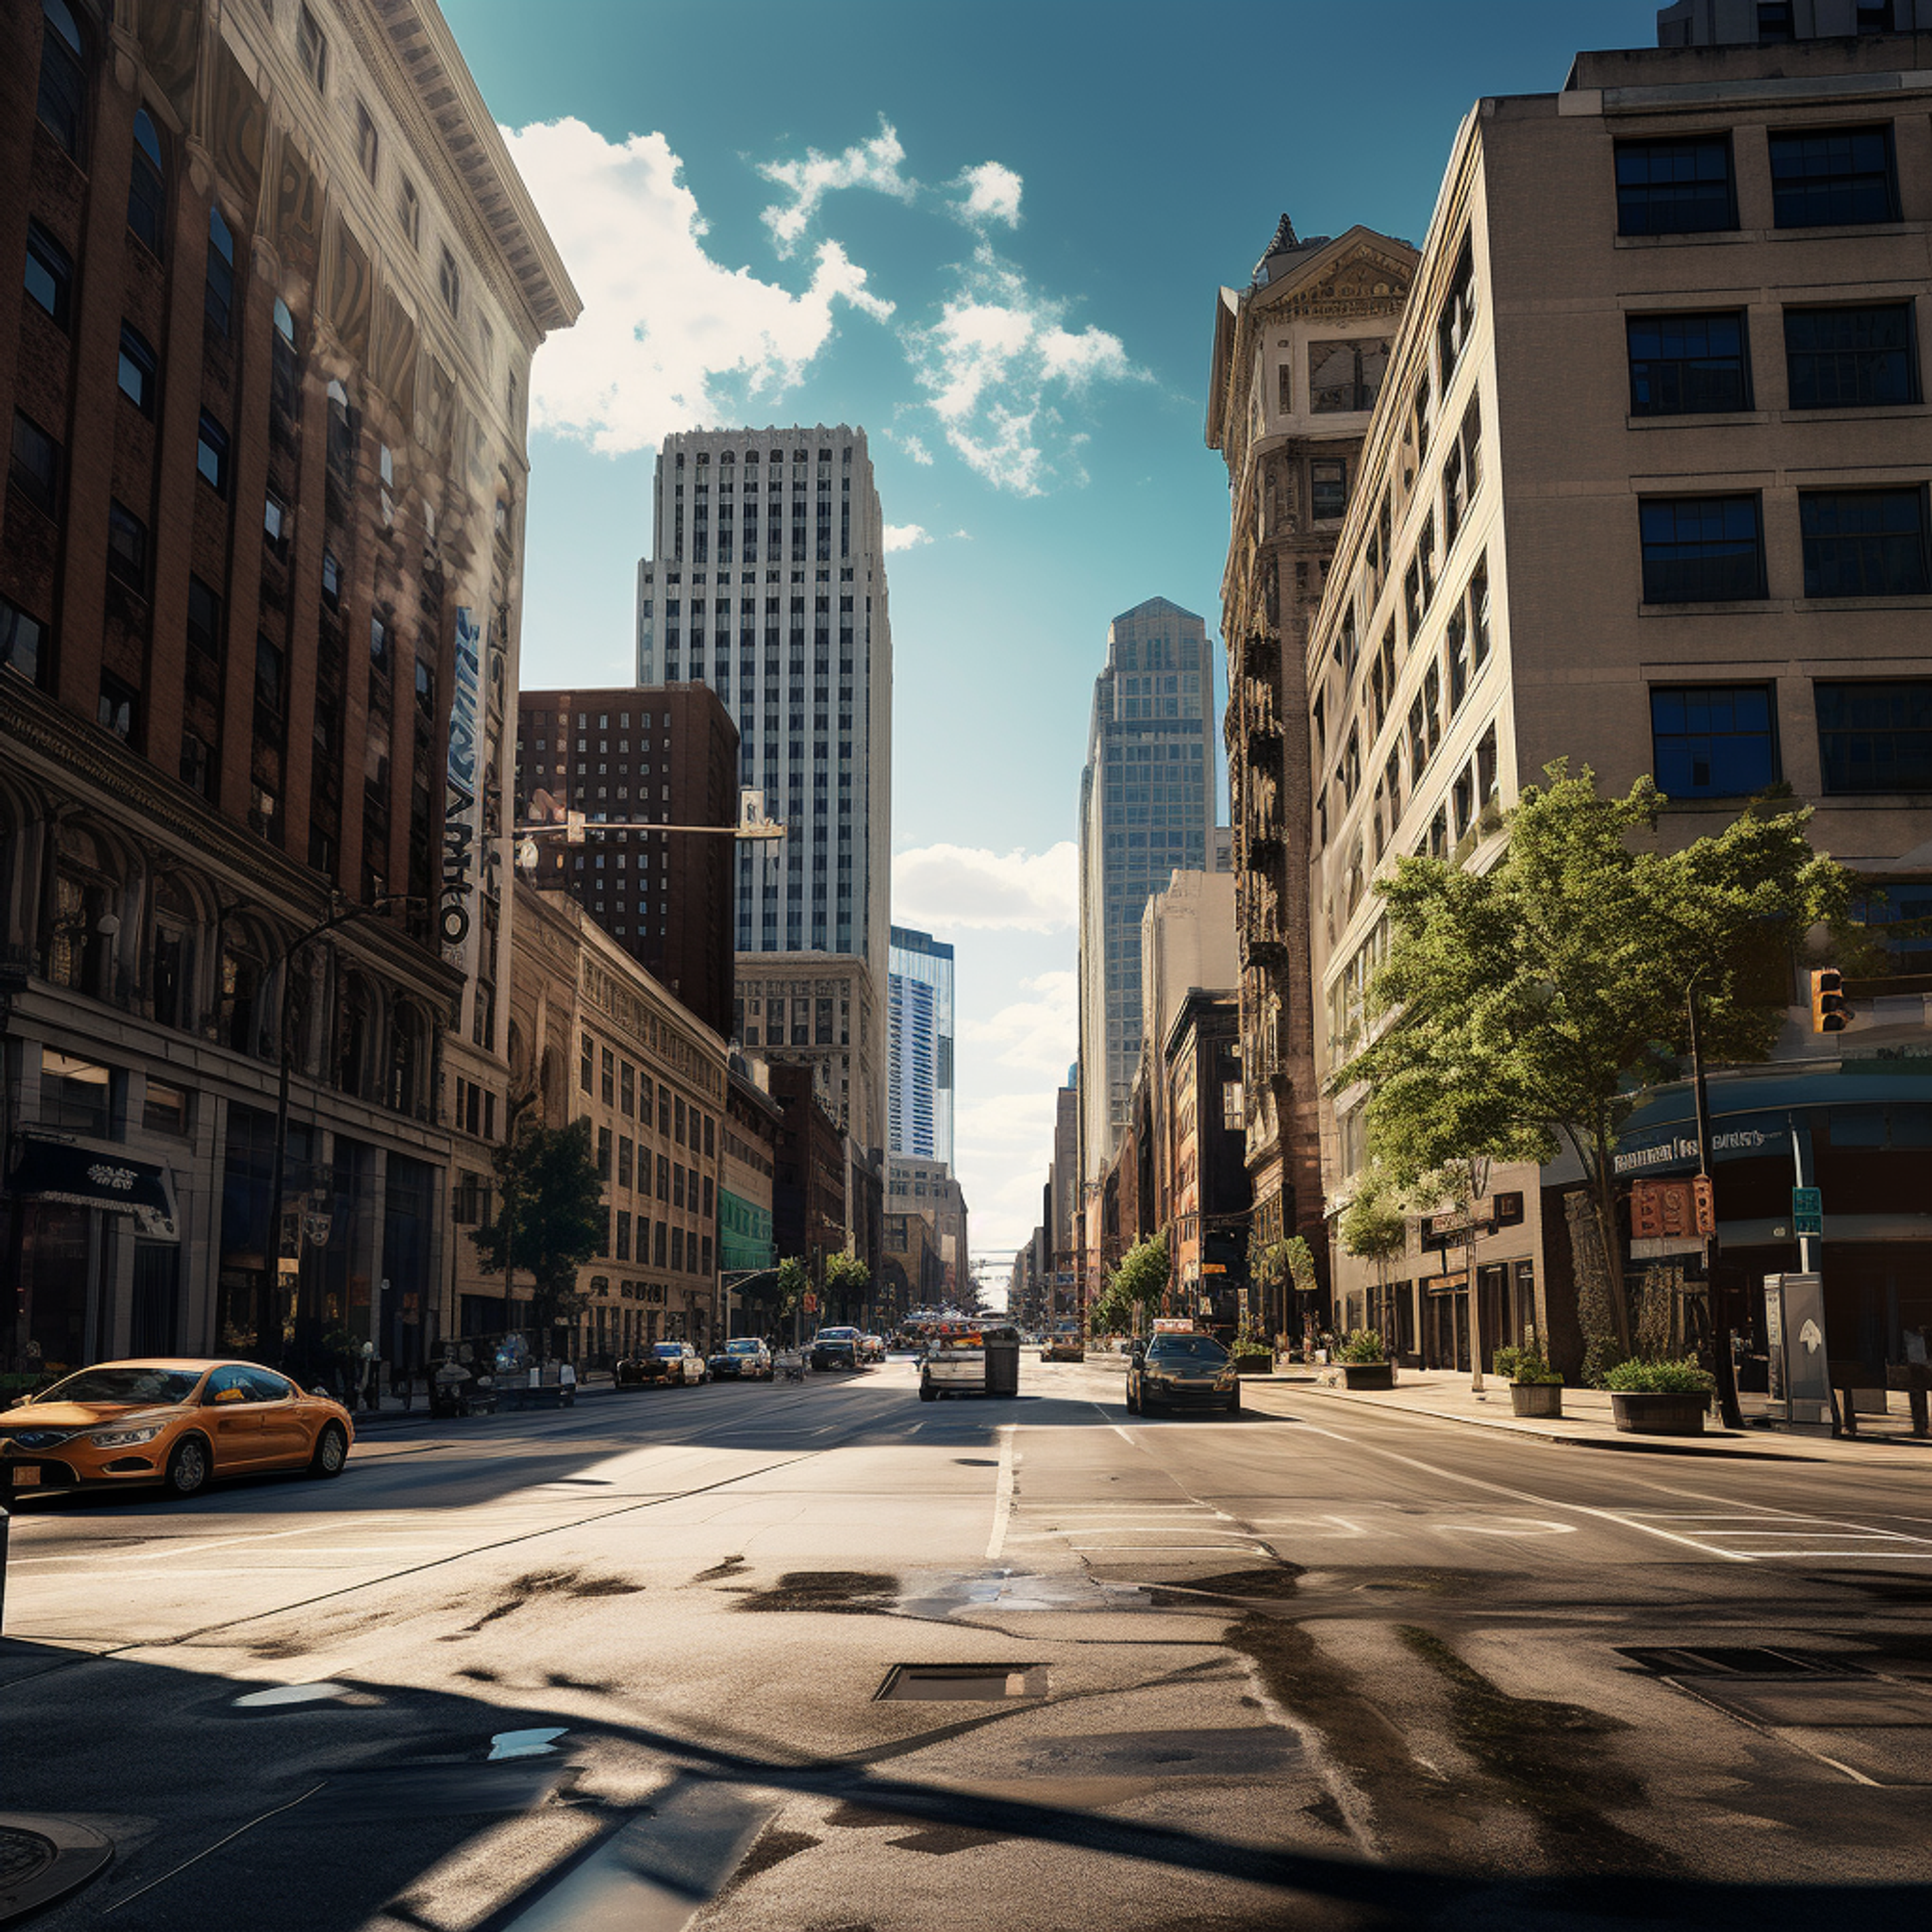 Sunny day view down a bustling Detroit street lined with a mix of historic and modern buildings, with clear blue skies above and light traffic on the road, highlighting the city's urban architecture and vitality.